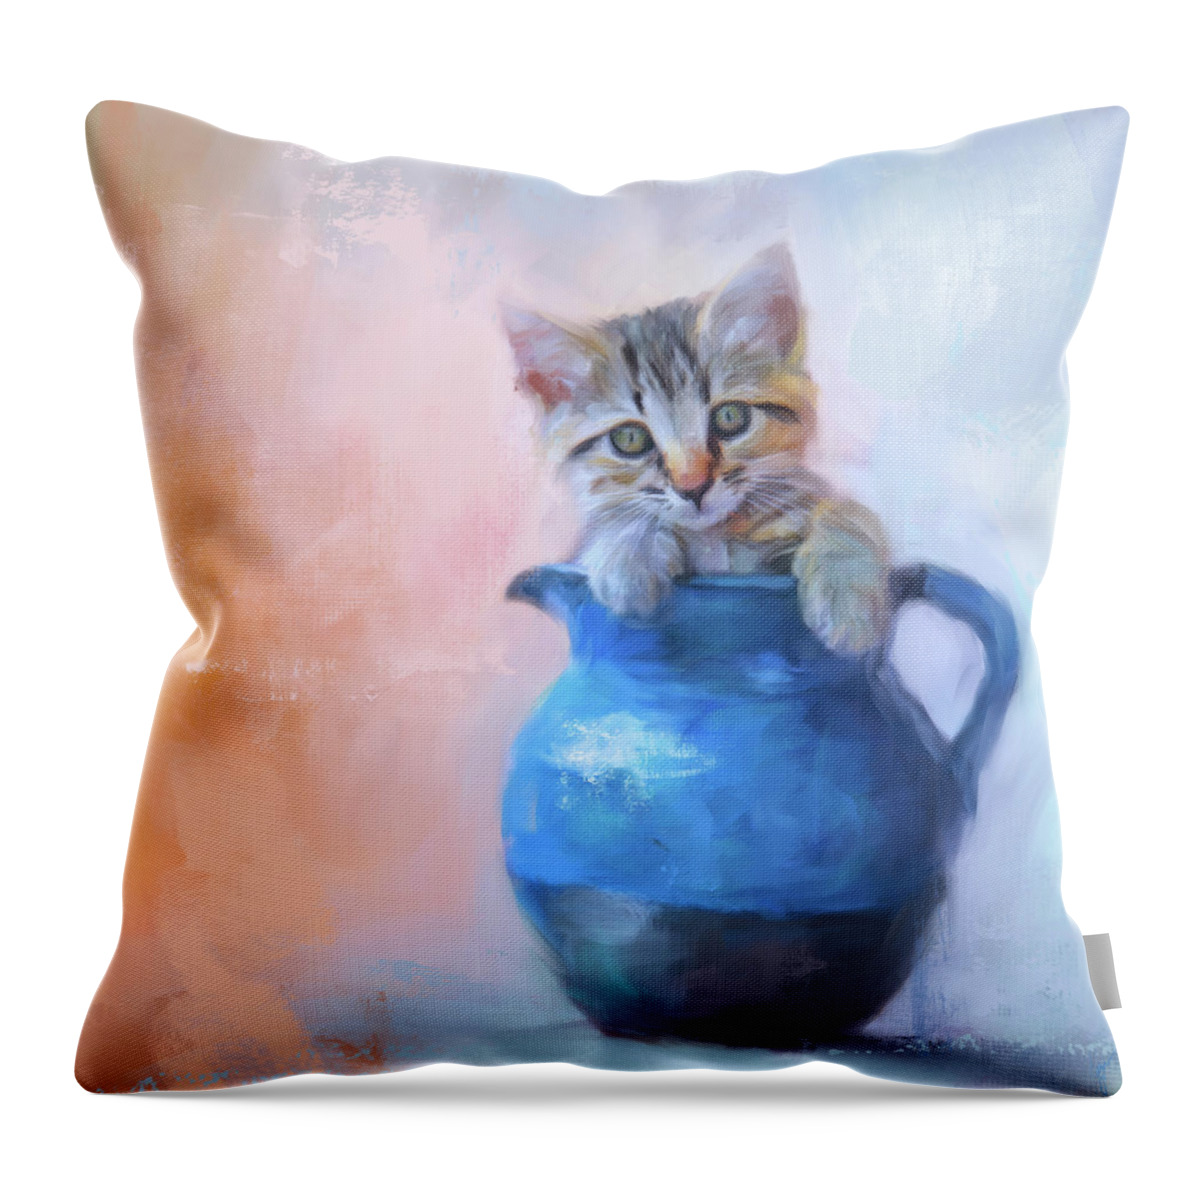 Colorful Throw Pillow featuring the painting A Pitcher Full of Purrfection by Jai Johnson